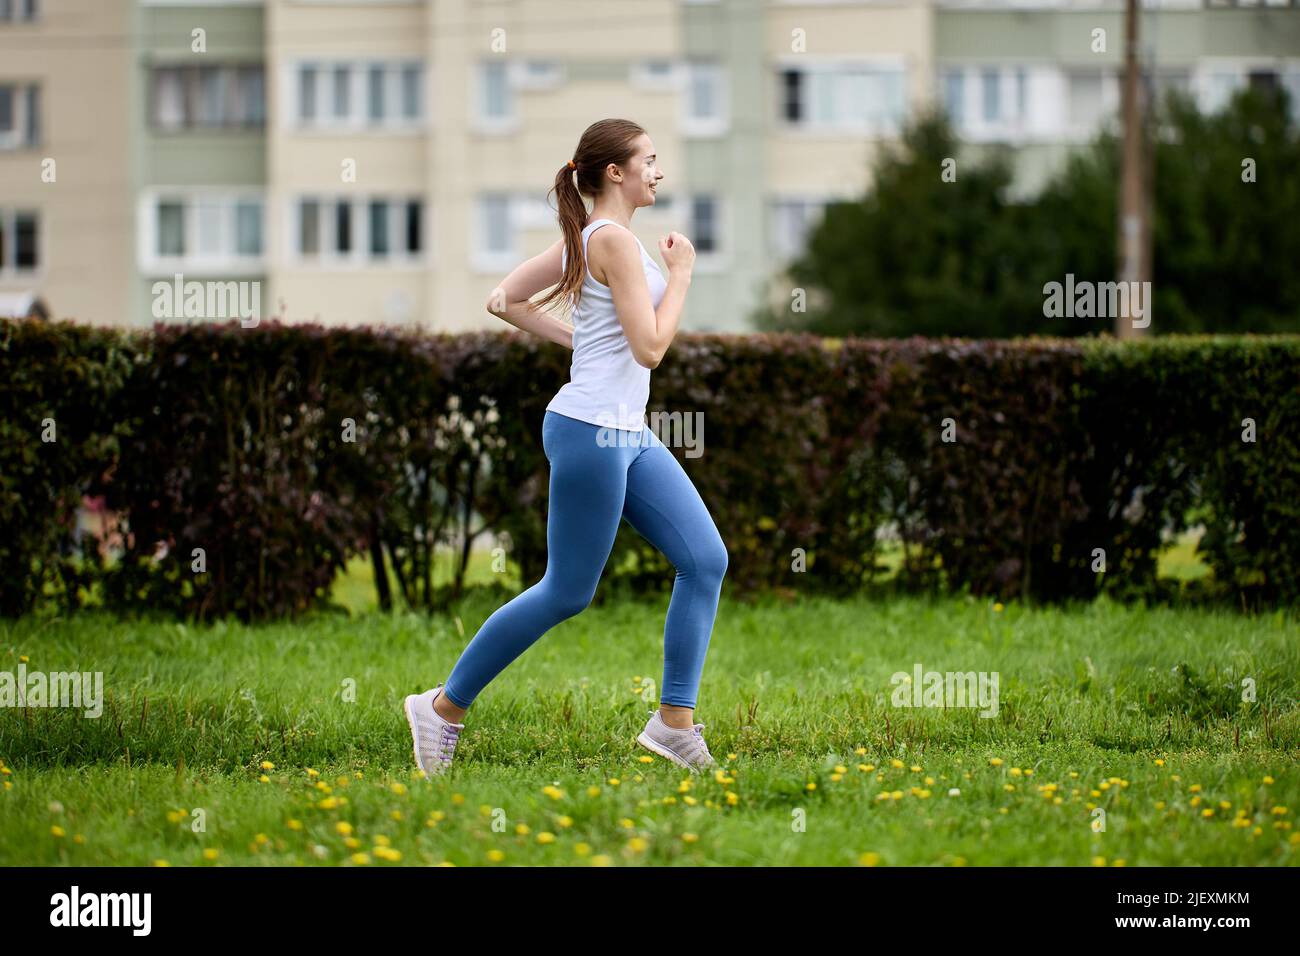 Woman 30 years old runs in city park. Stock Photo